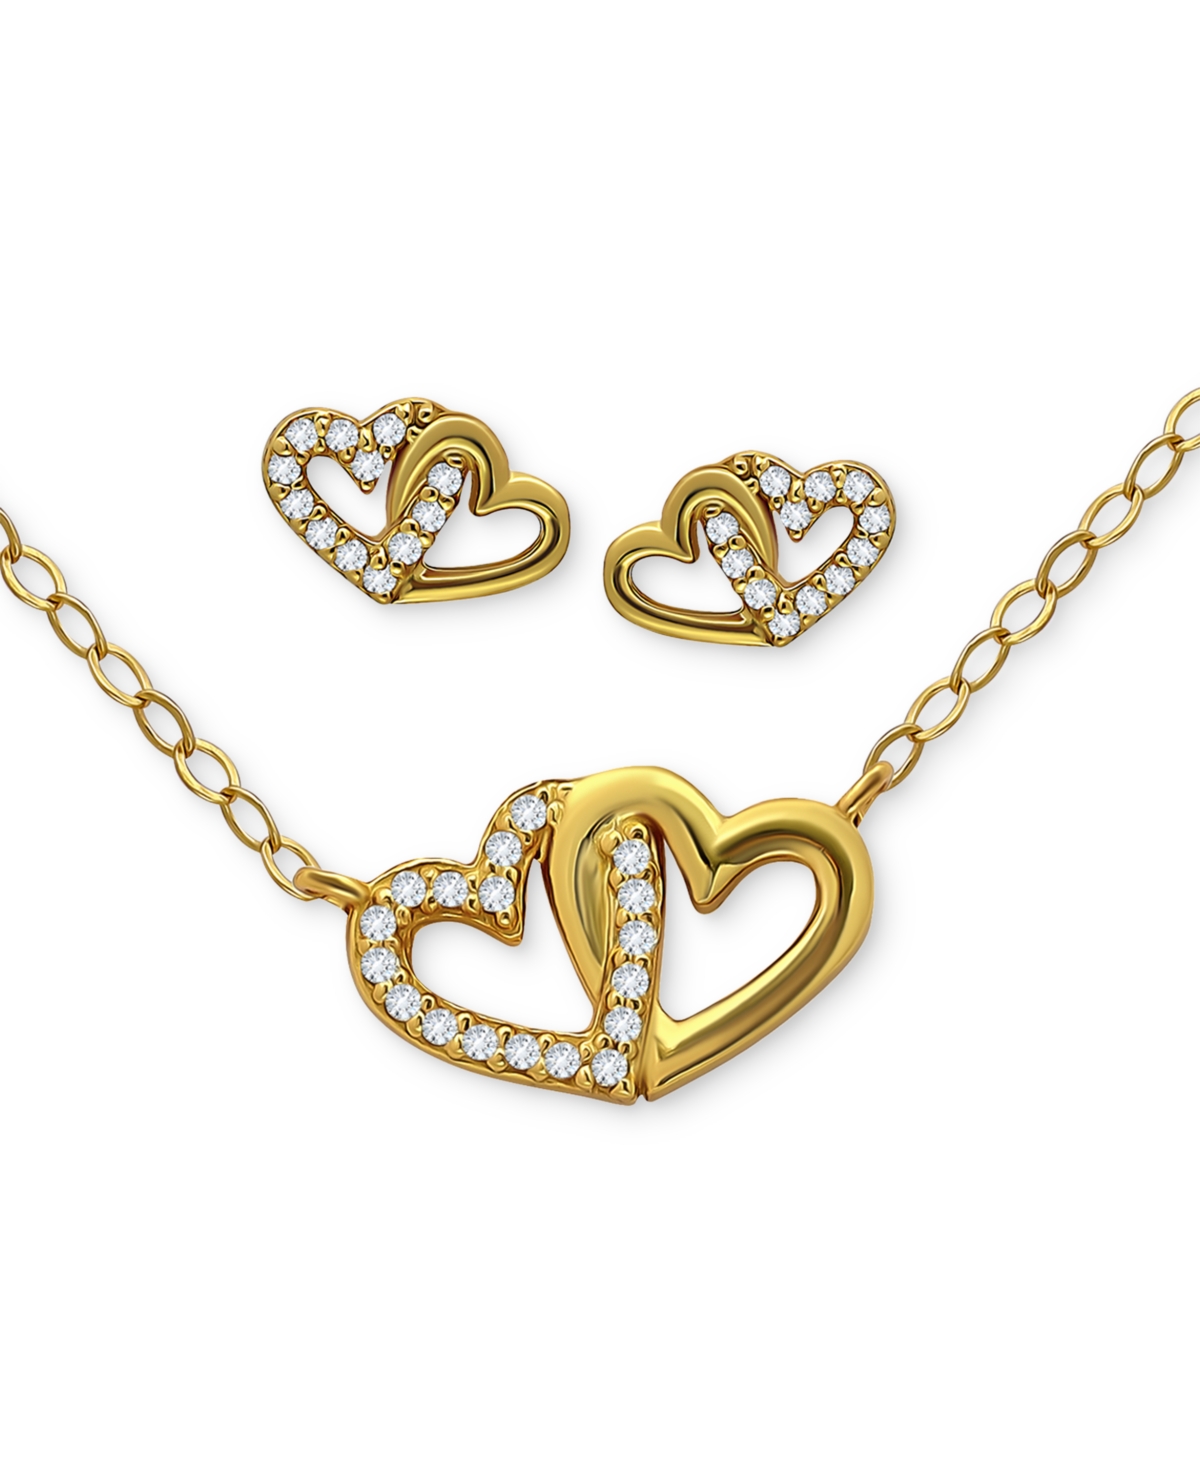 Giani Bernini 2-pc. Set Cubic Zirconia Double Heart Pendant Necklace & Matching Stud Earrings In 18k Gold-plated S